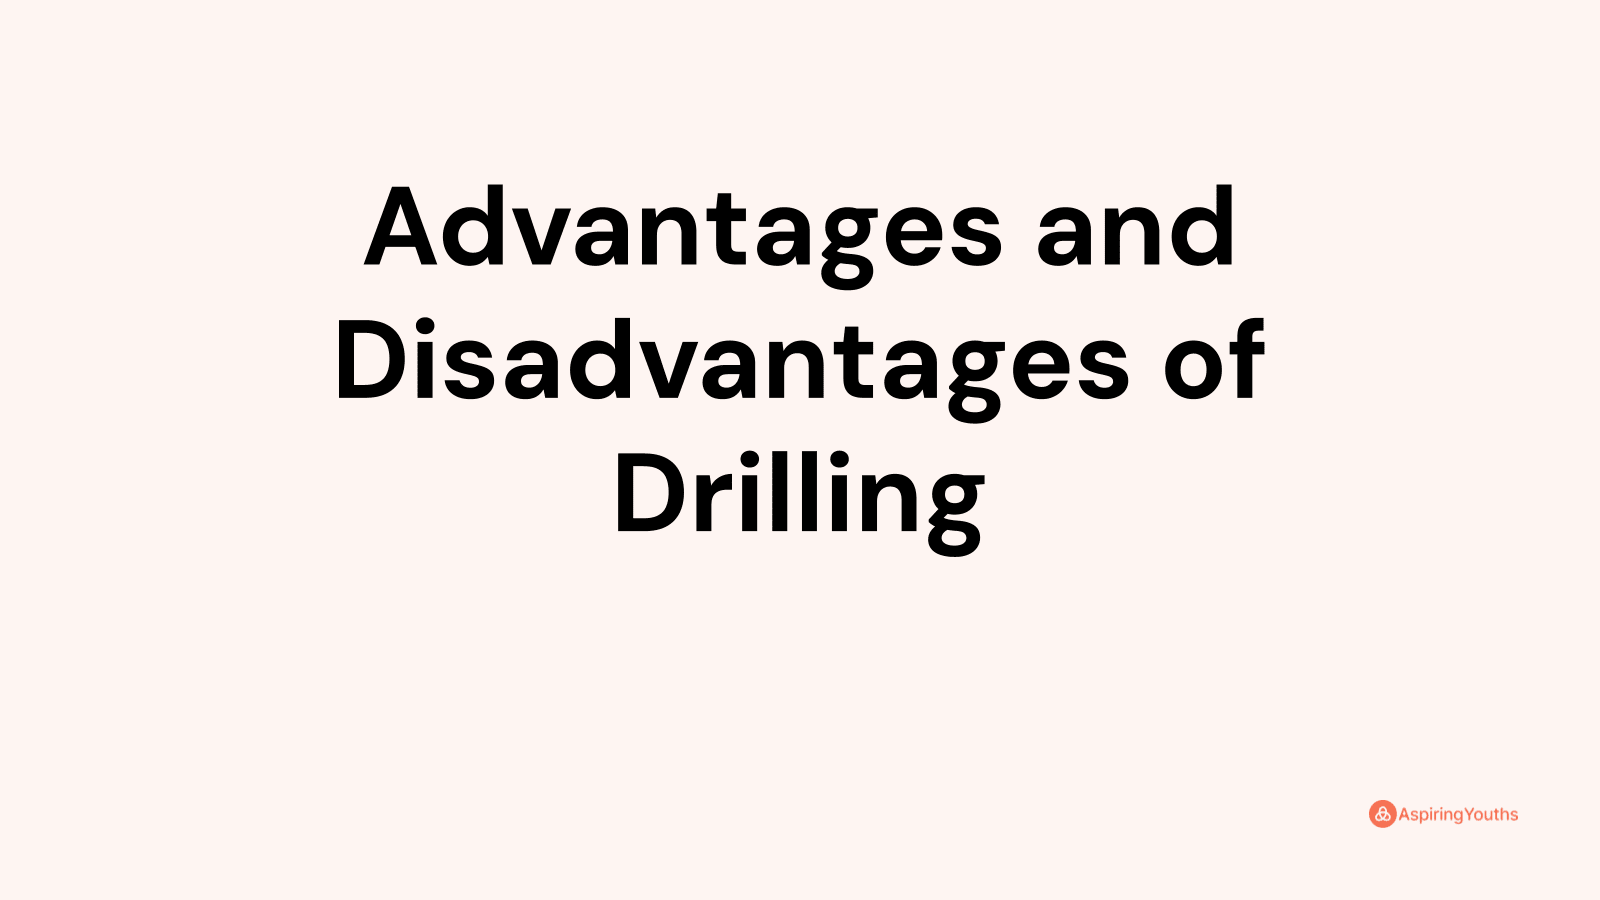 Advantages and disadvantages of Drilling